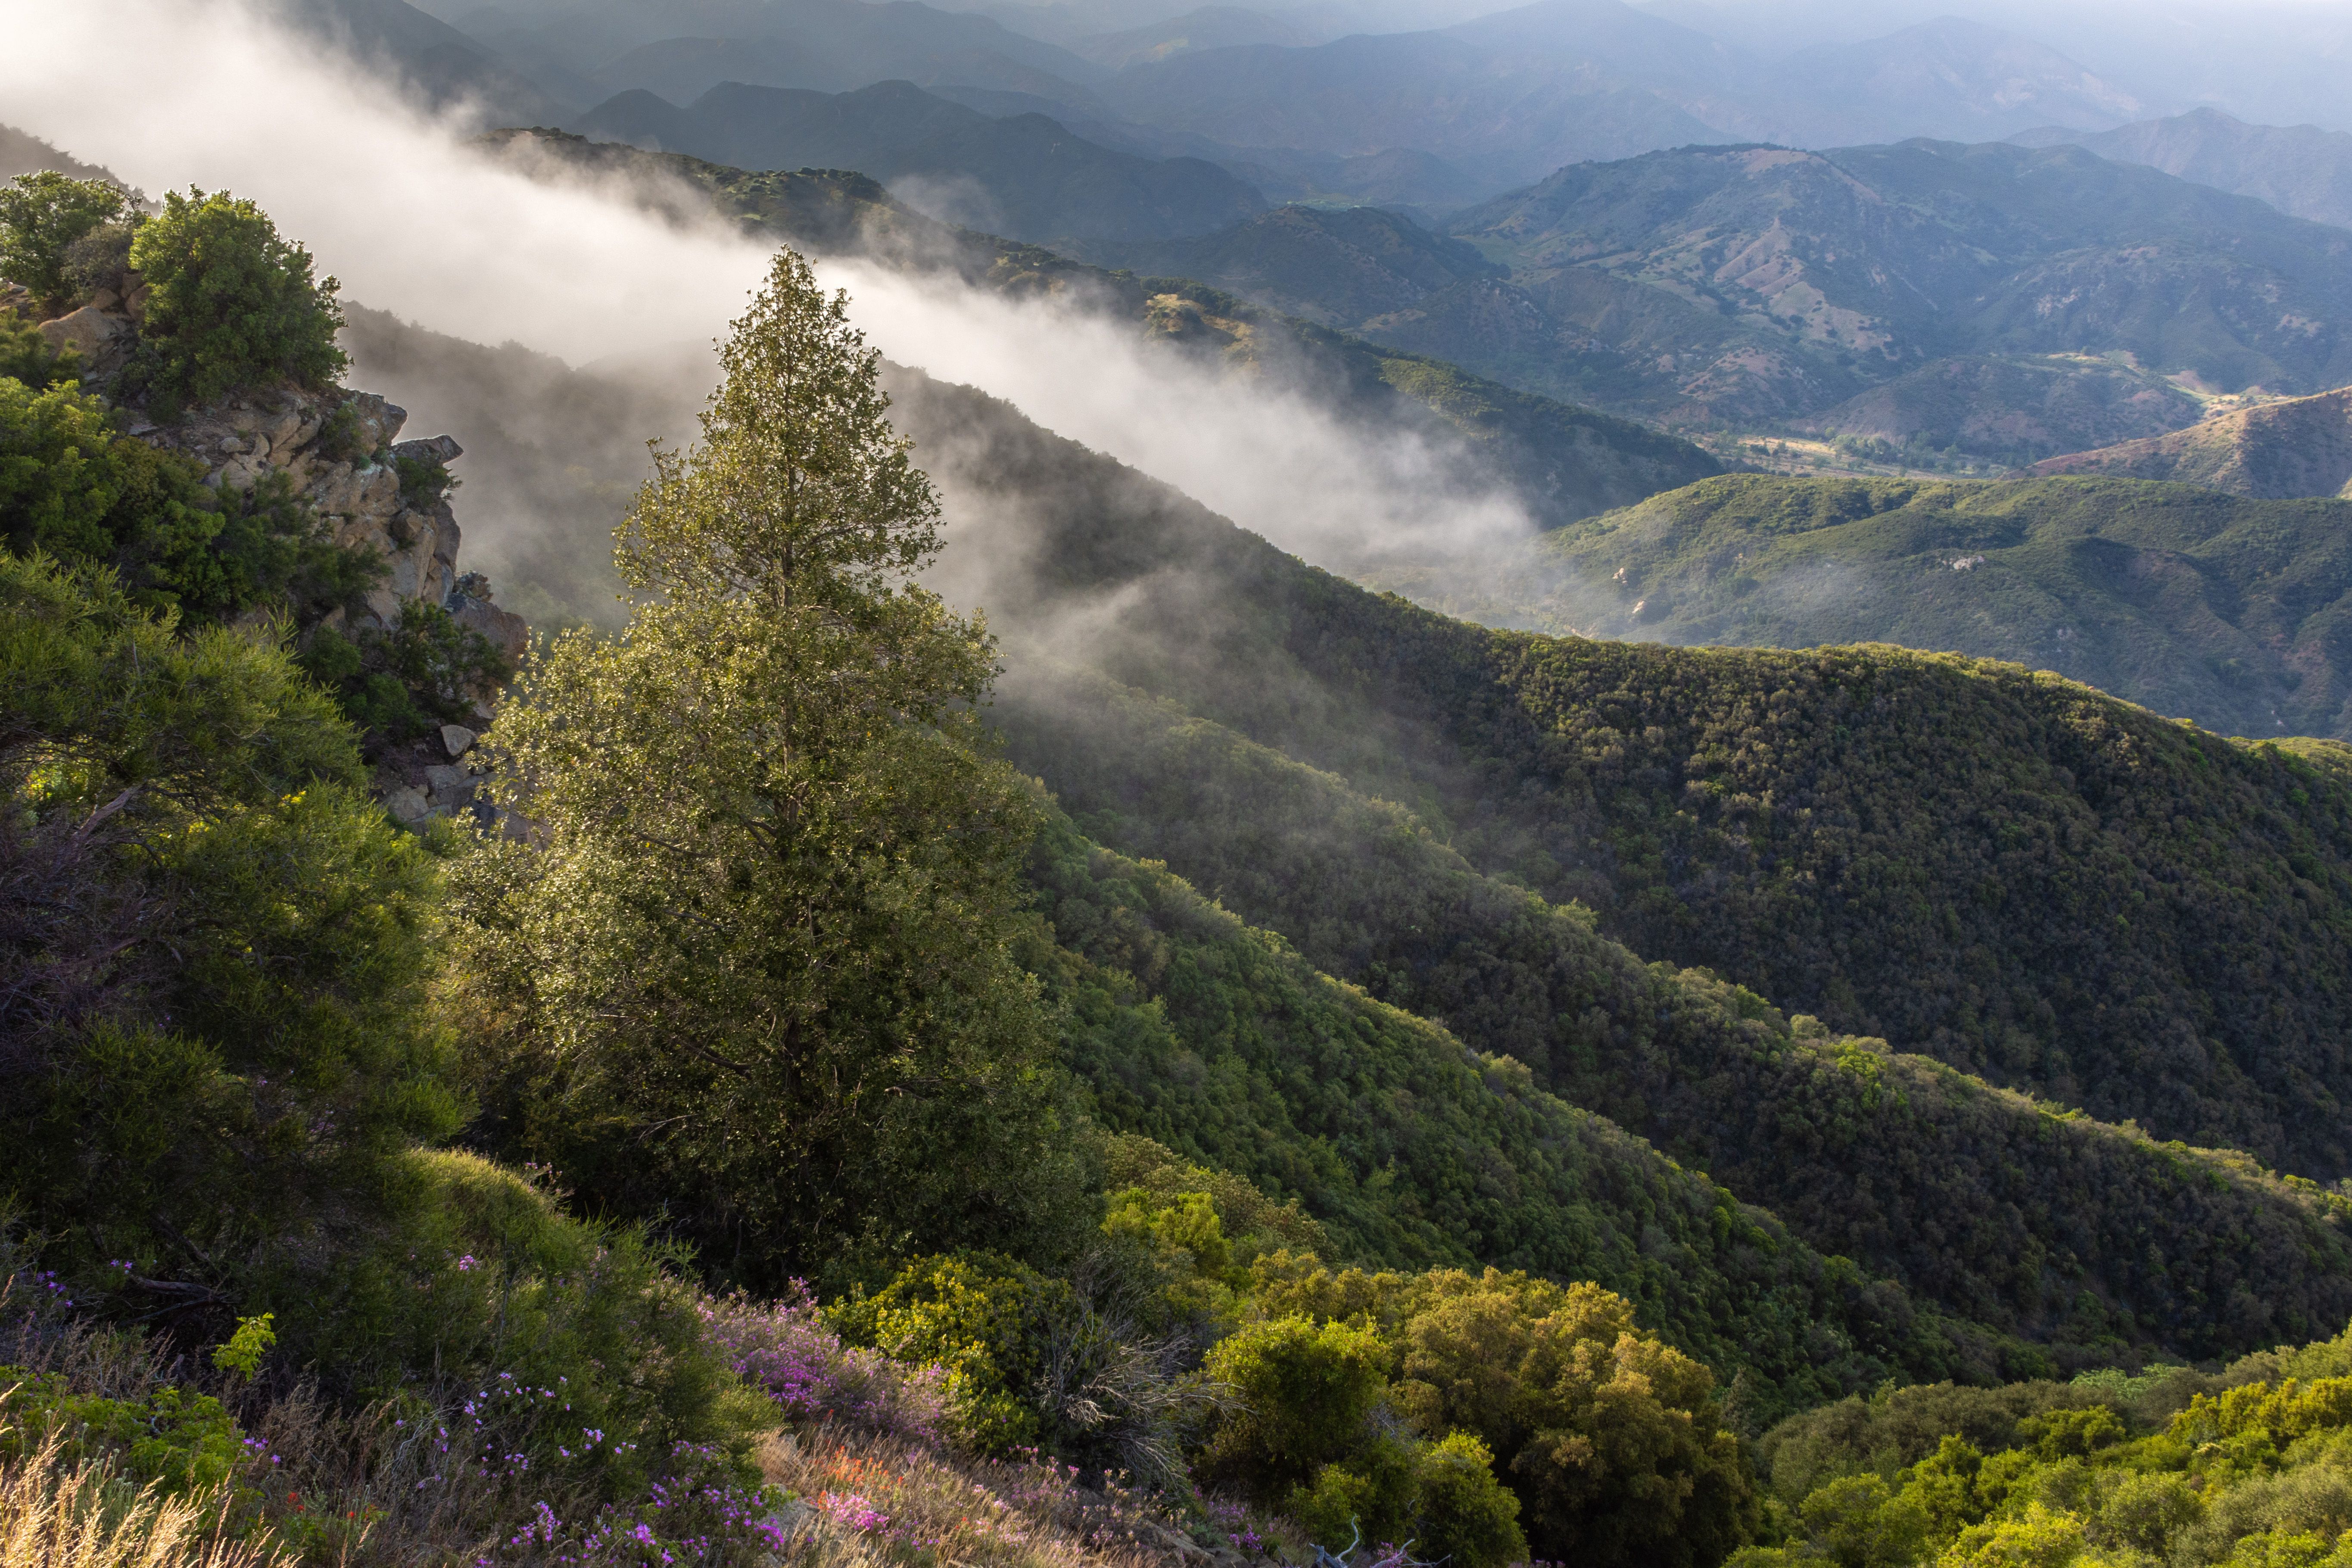 Chaparral of the forest with fog drifting down a valley in the foothills.